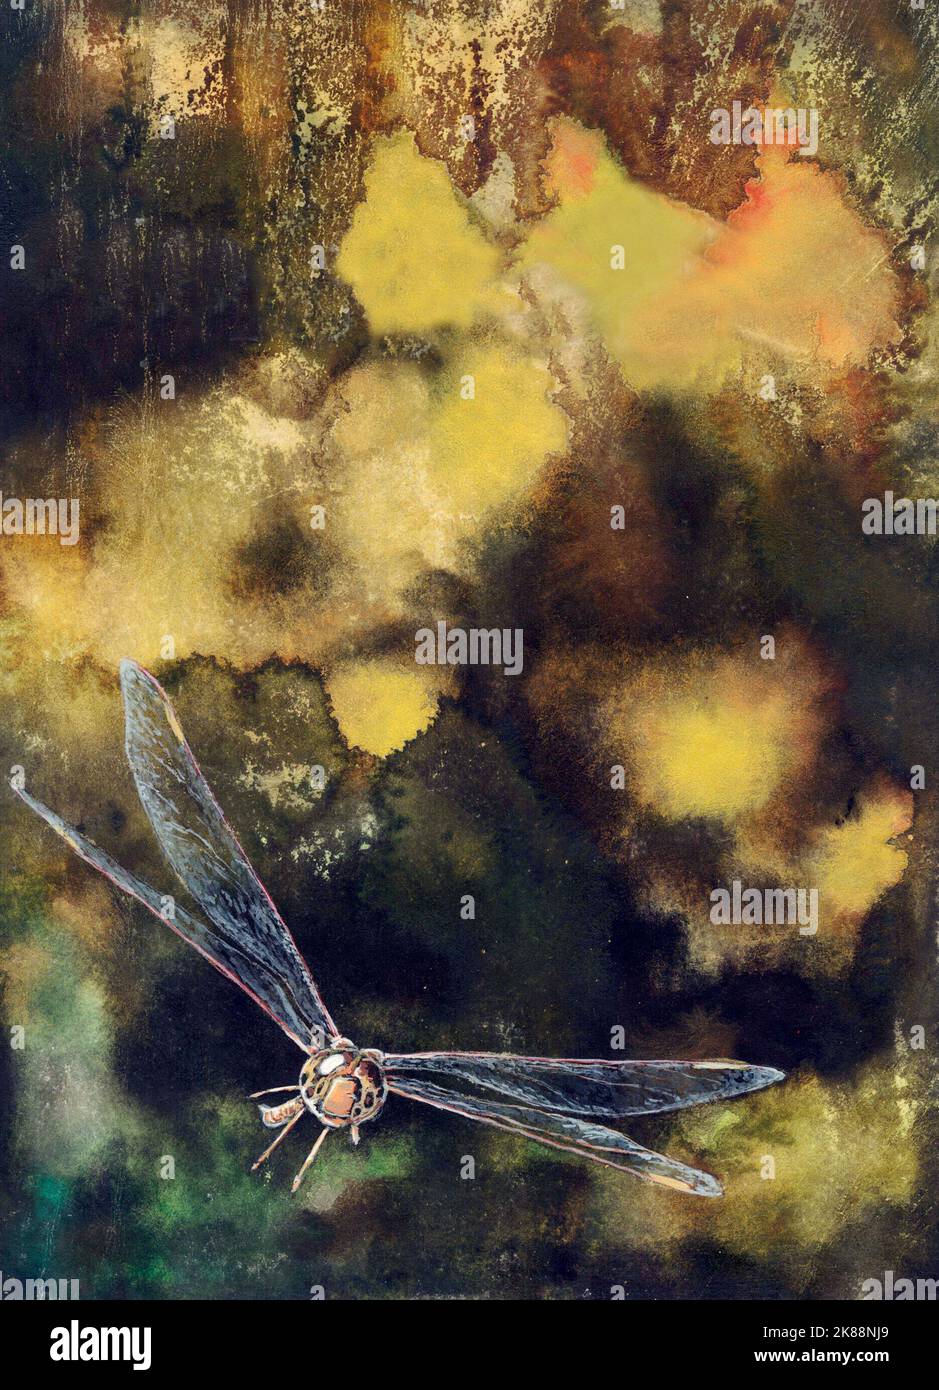 Watercolour art dragonfly / damselfly, against abstract impressionist bark/foliage background Suit book cover/ editorial illustrating flying insects Stock Photo